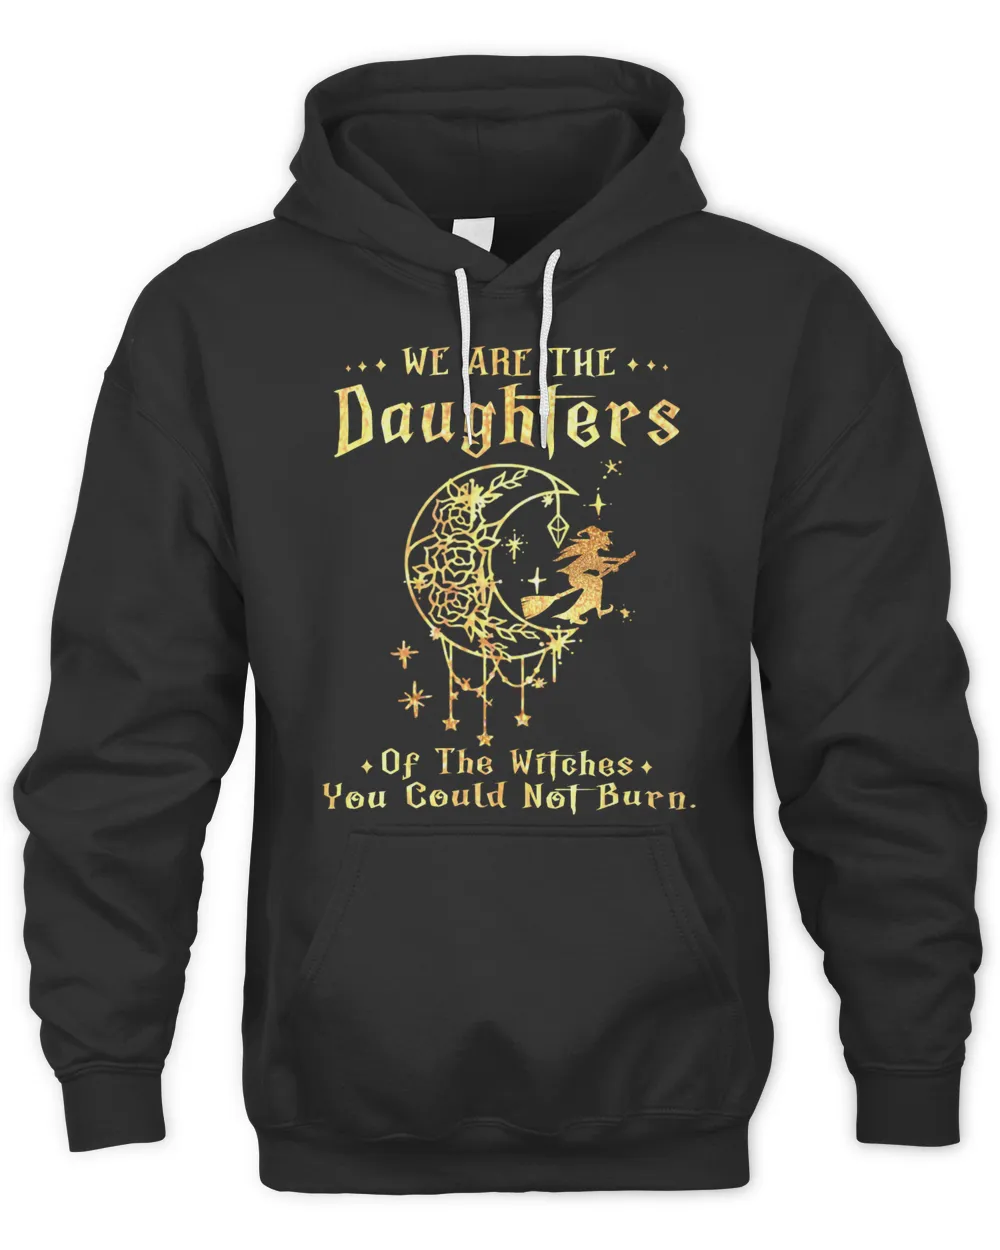 We are the Daughters of the witches gold moon